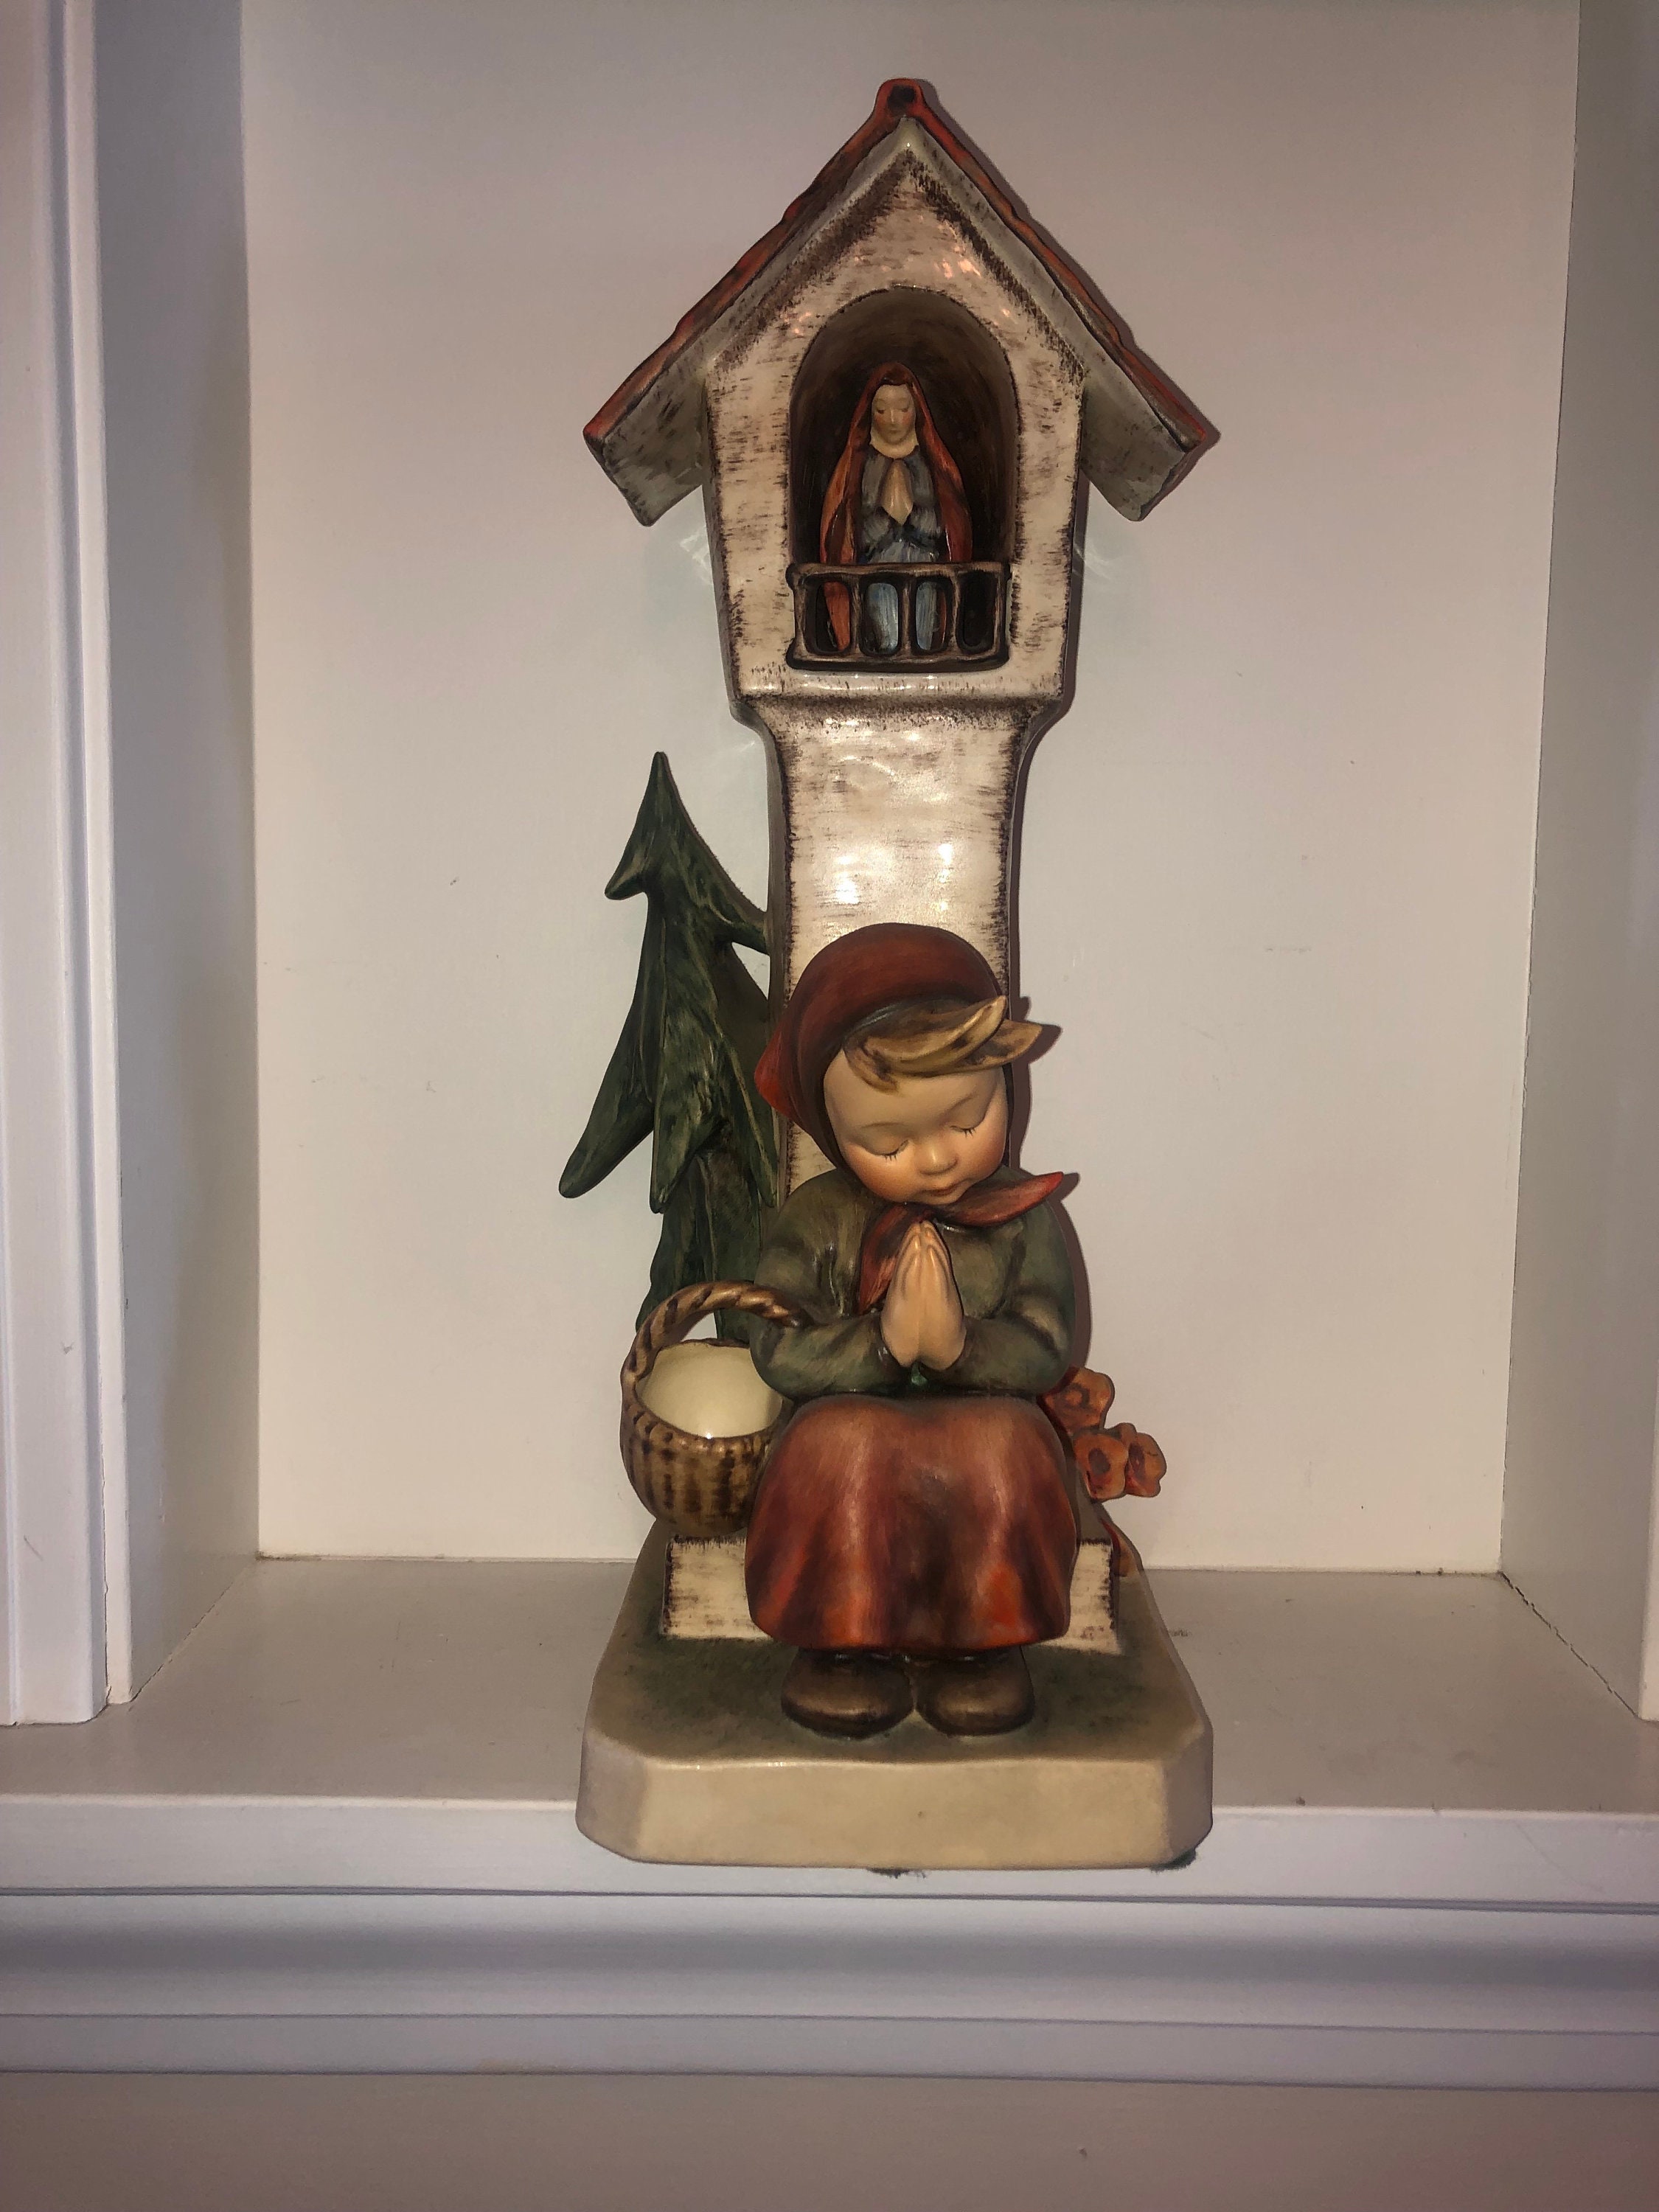 LARGE Goebel Hummel adoration Collectible Figurine 23/1 TMK3 Children  Praying to Virgin May and Baby Jesus CUTE Collectible Gift 